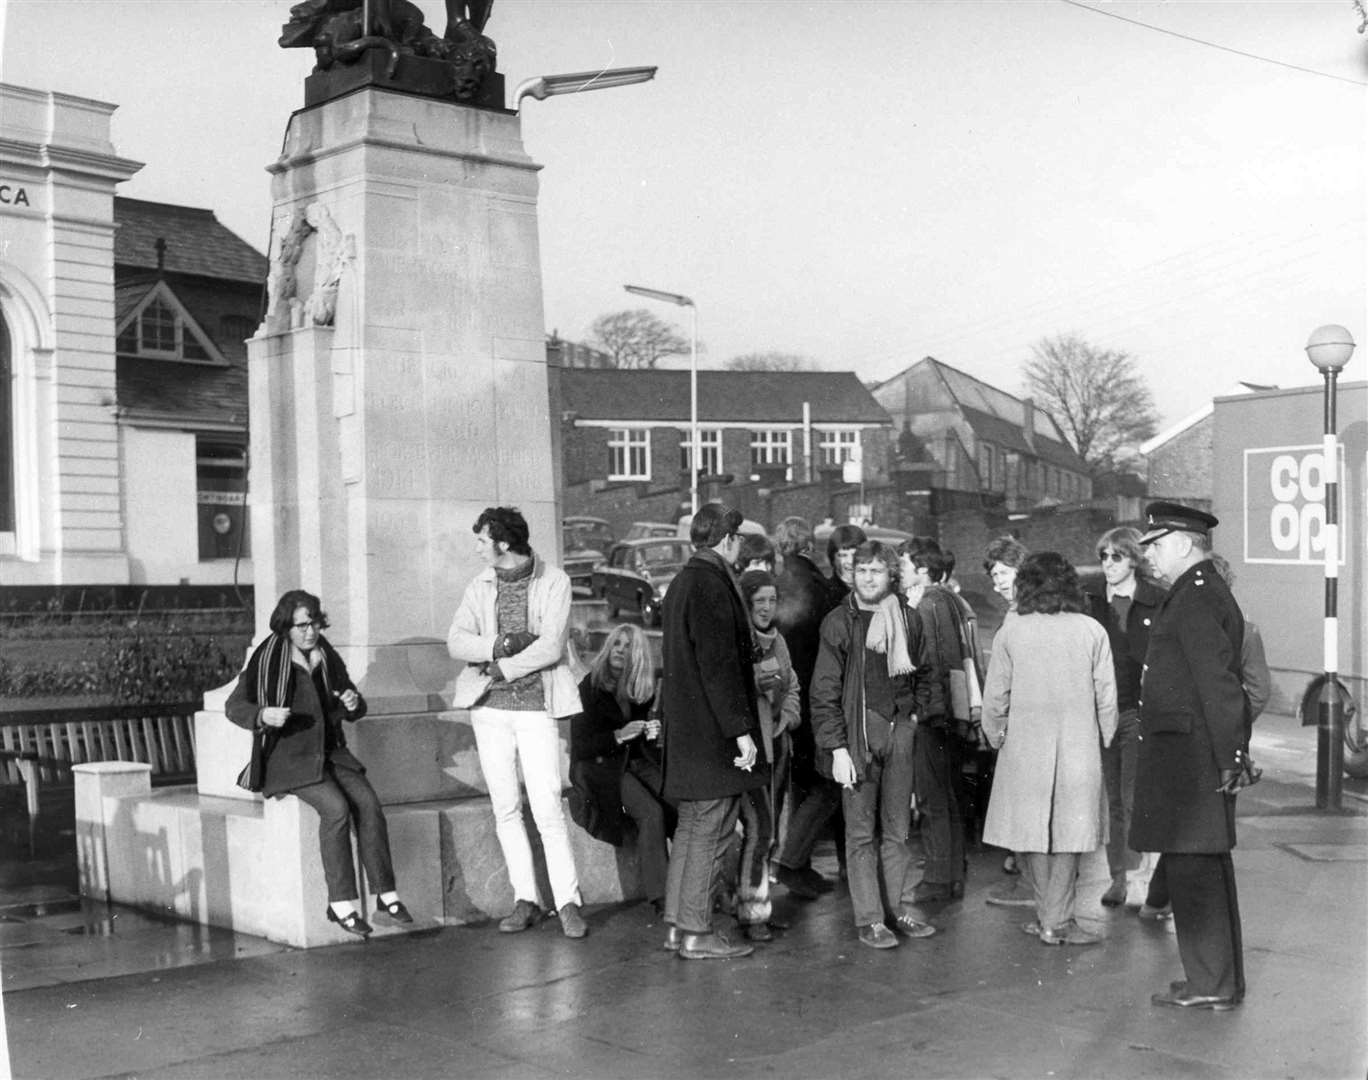 A protest against the Vietnam War at the Broadway war memorial in Maidstone in 1968